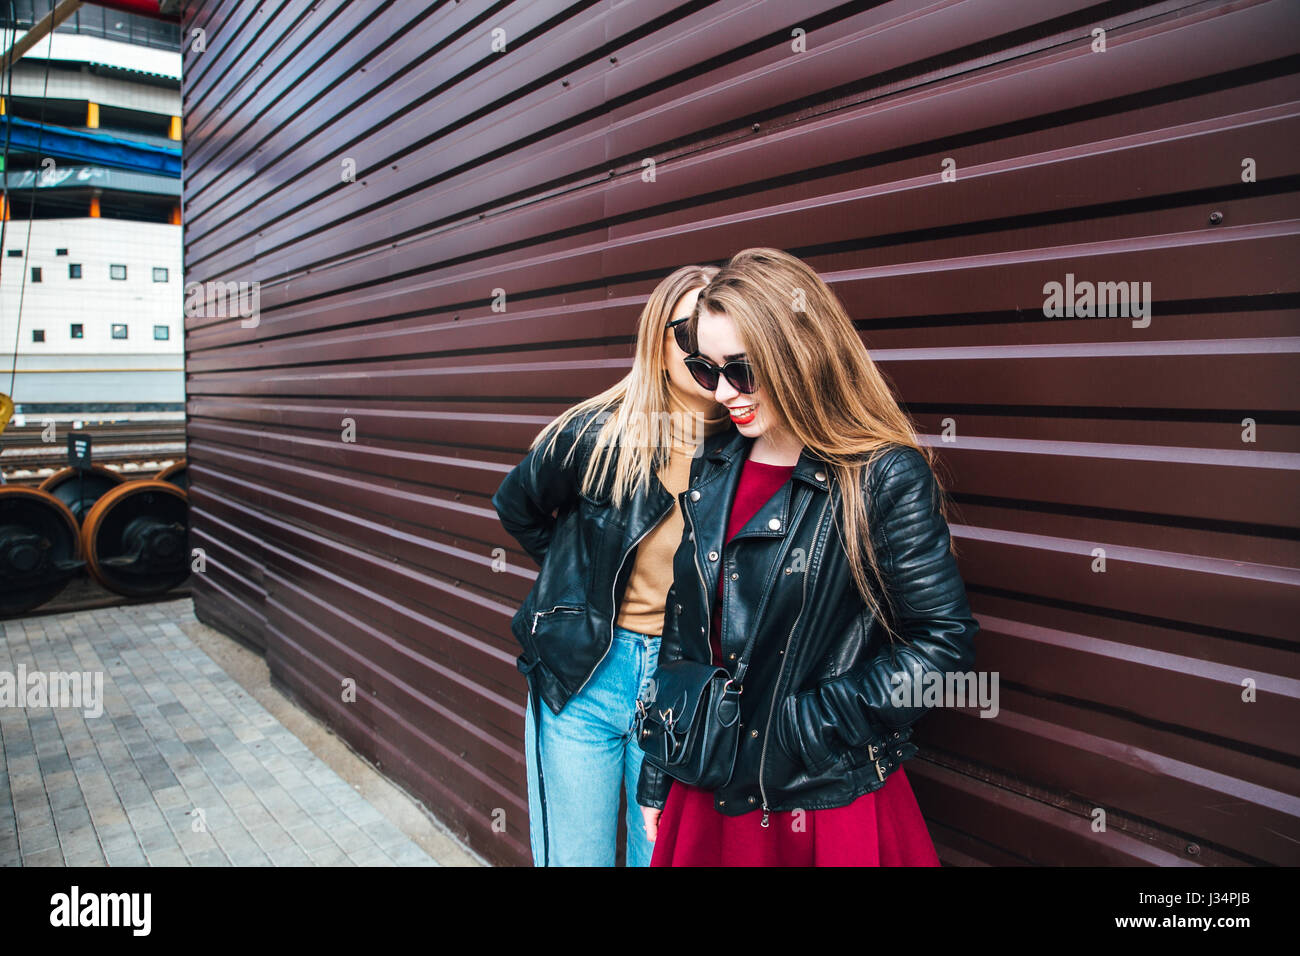 Two Women Talking in the City.Outdoor lifestyle portrait of two best friends hipster girls wearing stylish Leather Jacket and sunglasses, going crazy and having great time together Stock Photo